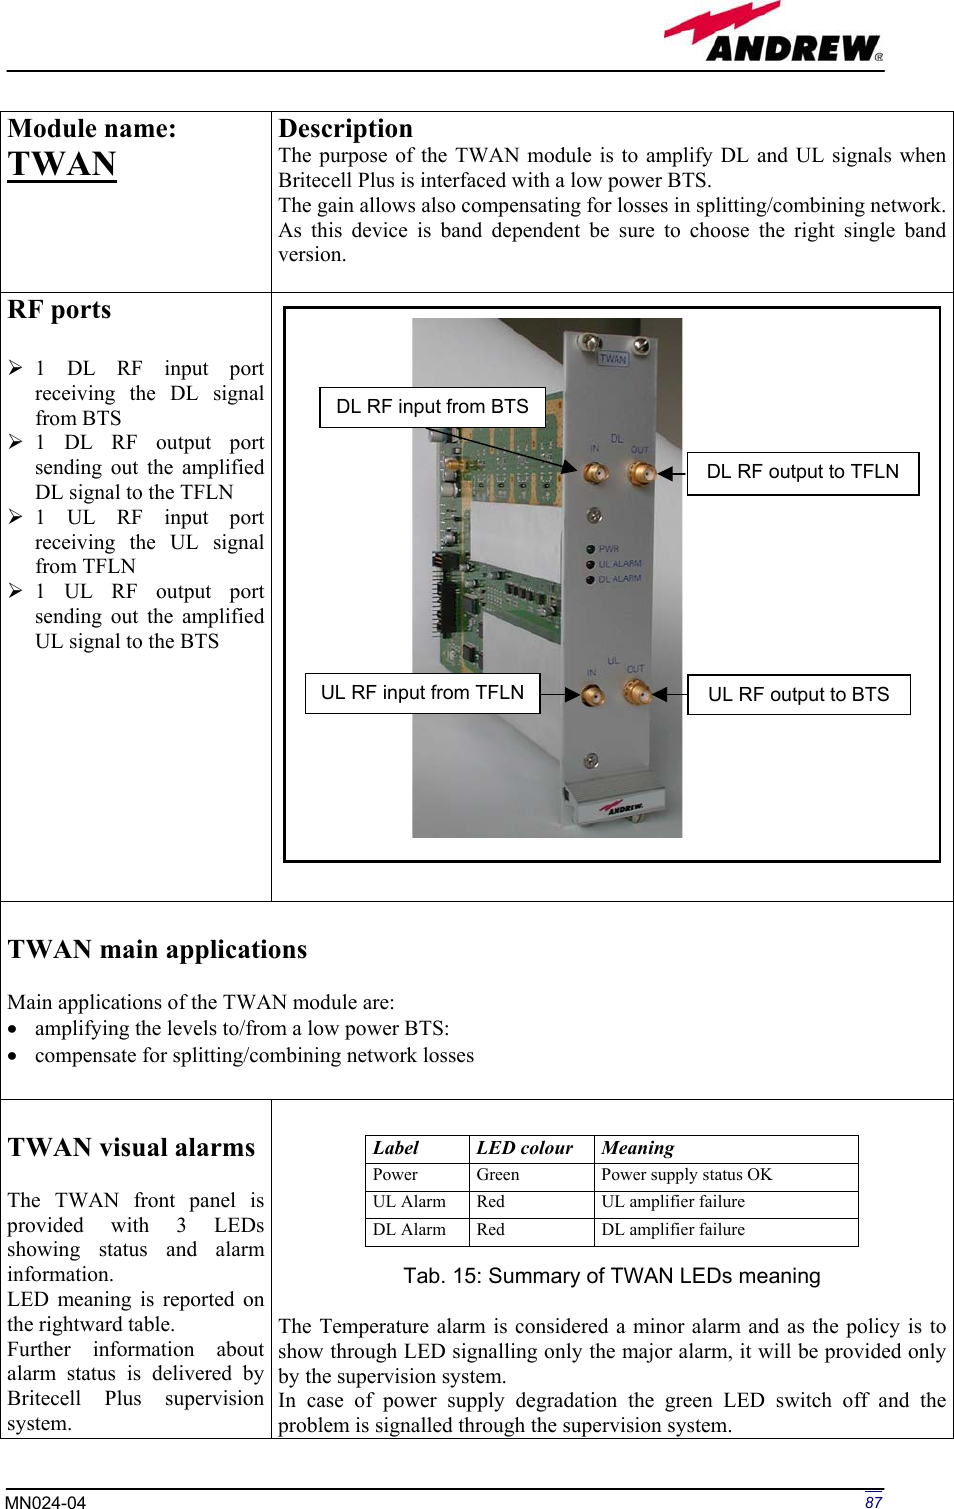 Page 87 of Andrew Wireless Innovations Group BCP-TFAM23 Model TFAM23 Downlink Booster User Manual MN024 04 rev3